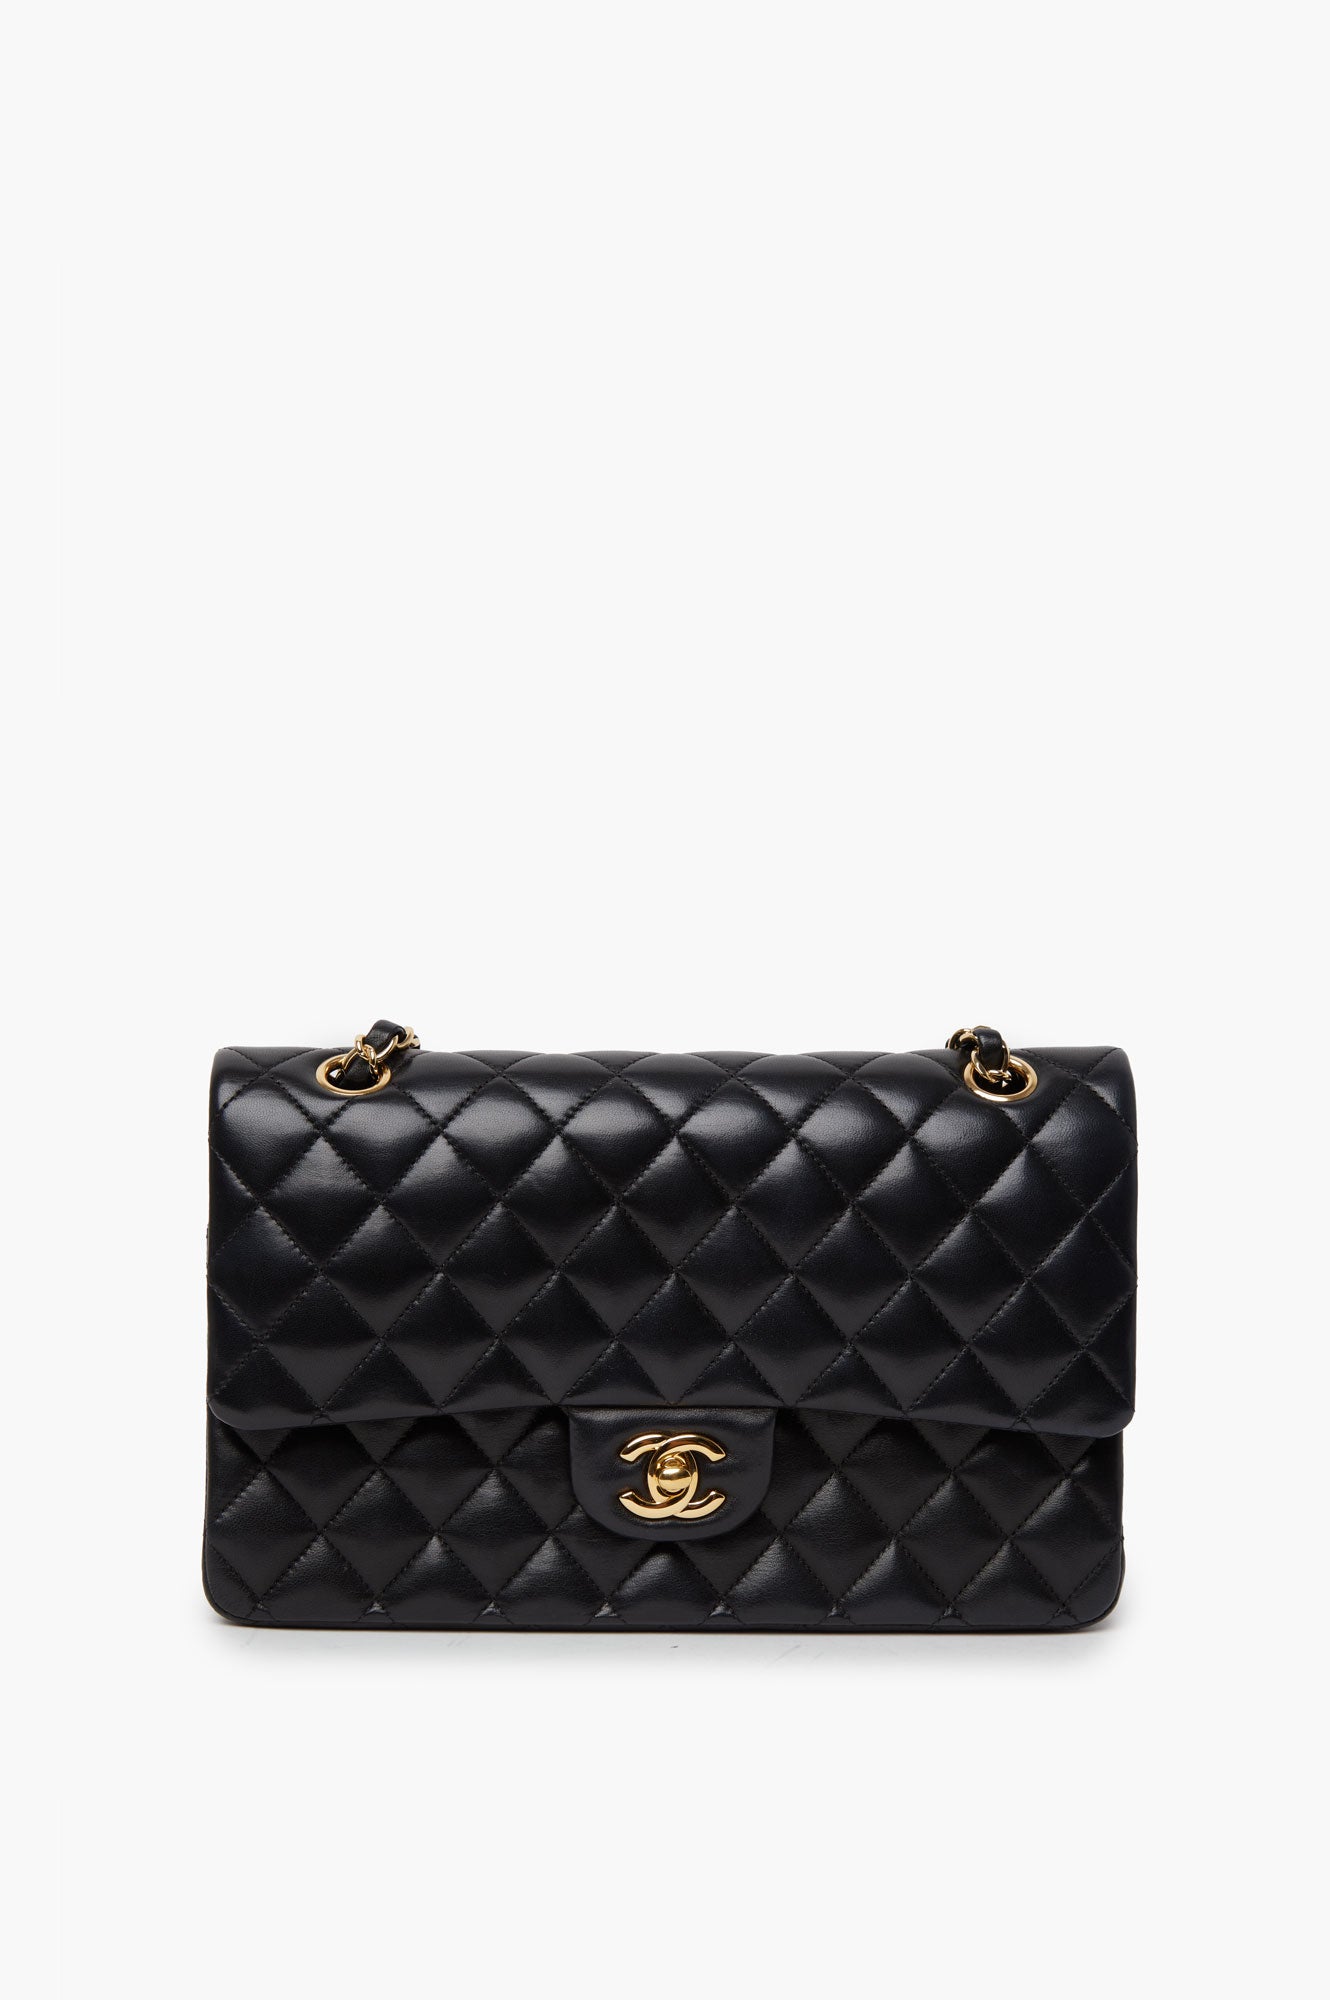 Chanel Black Quilted Lambskin Maxi Jumbo Vintage Classic Flap Bag Chanel